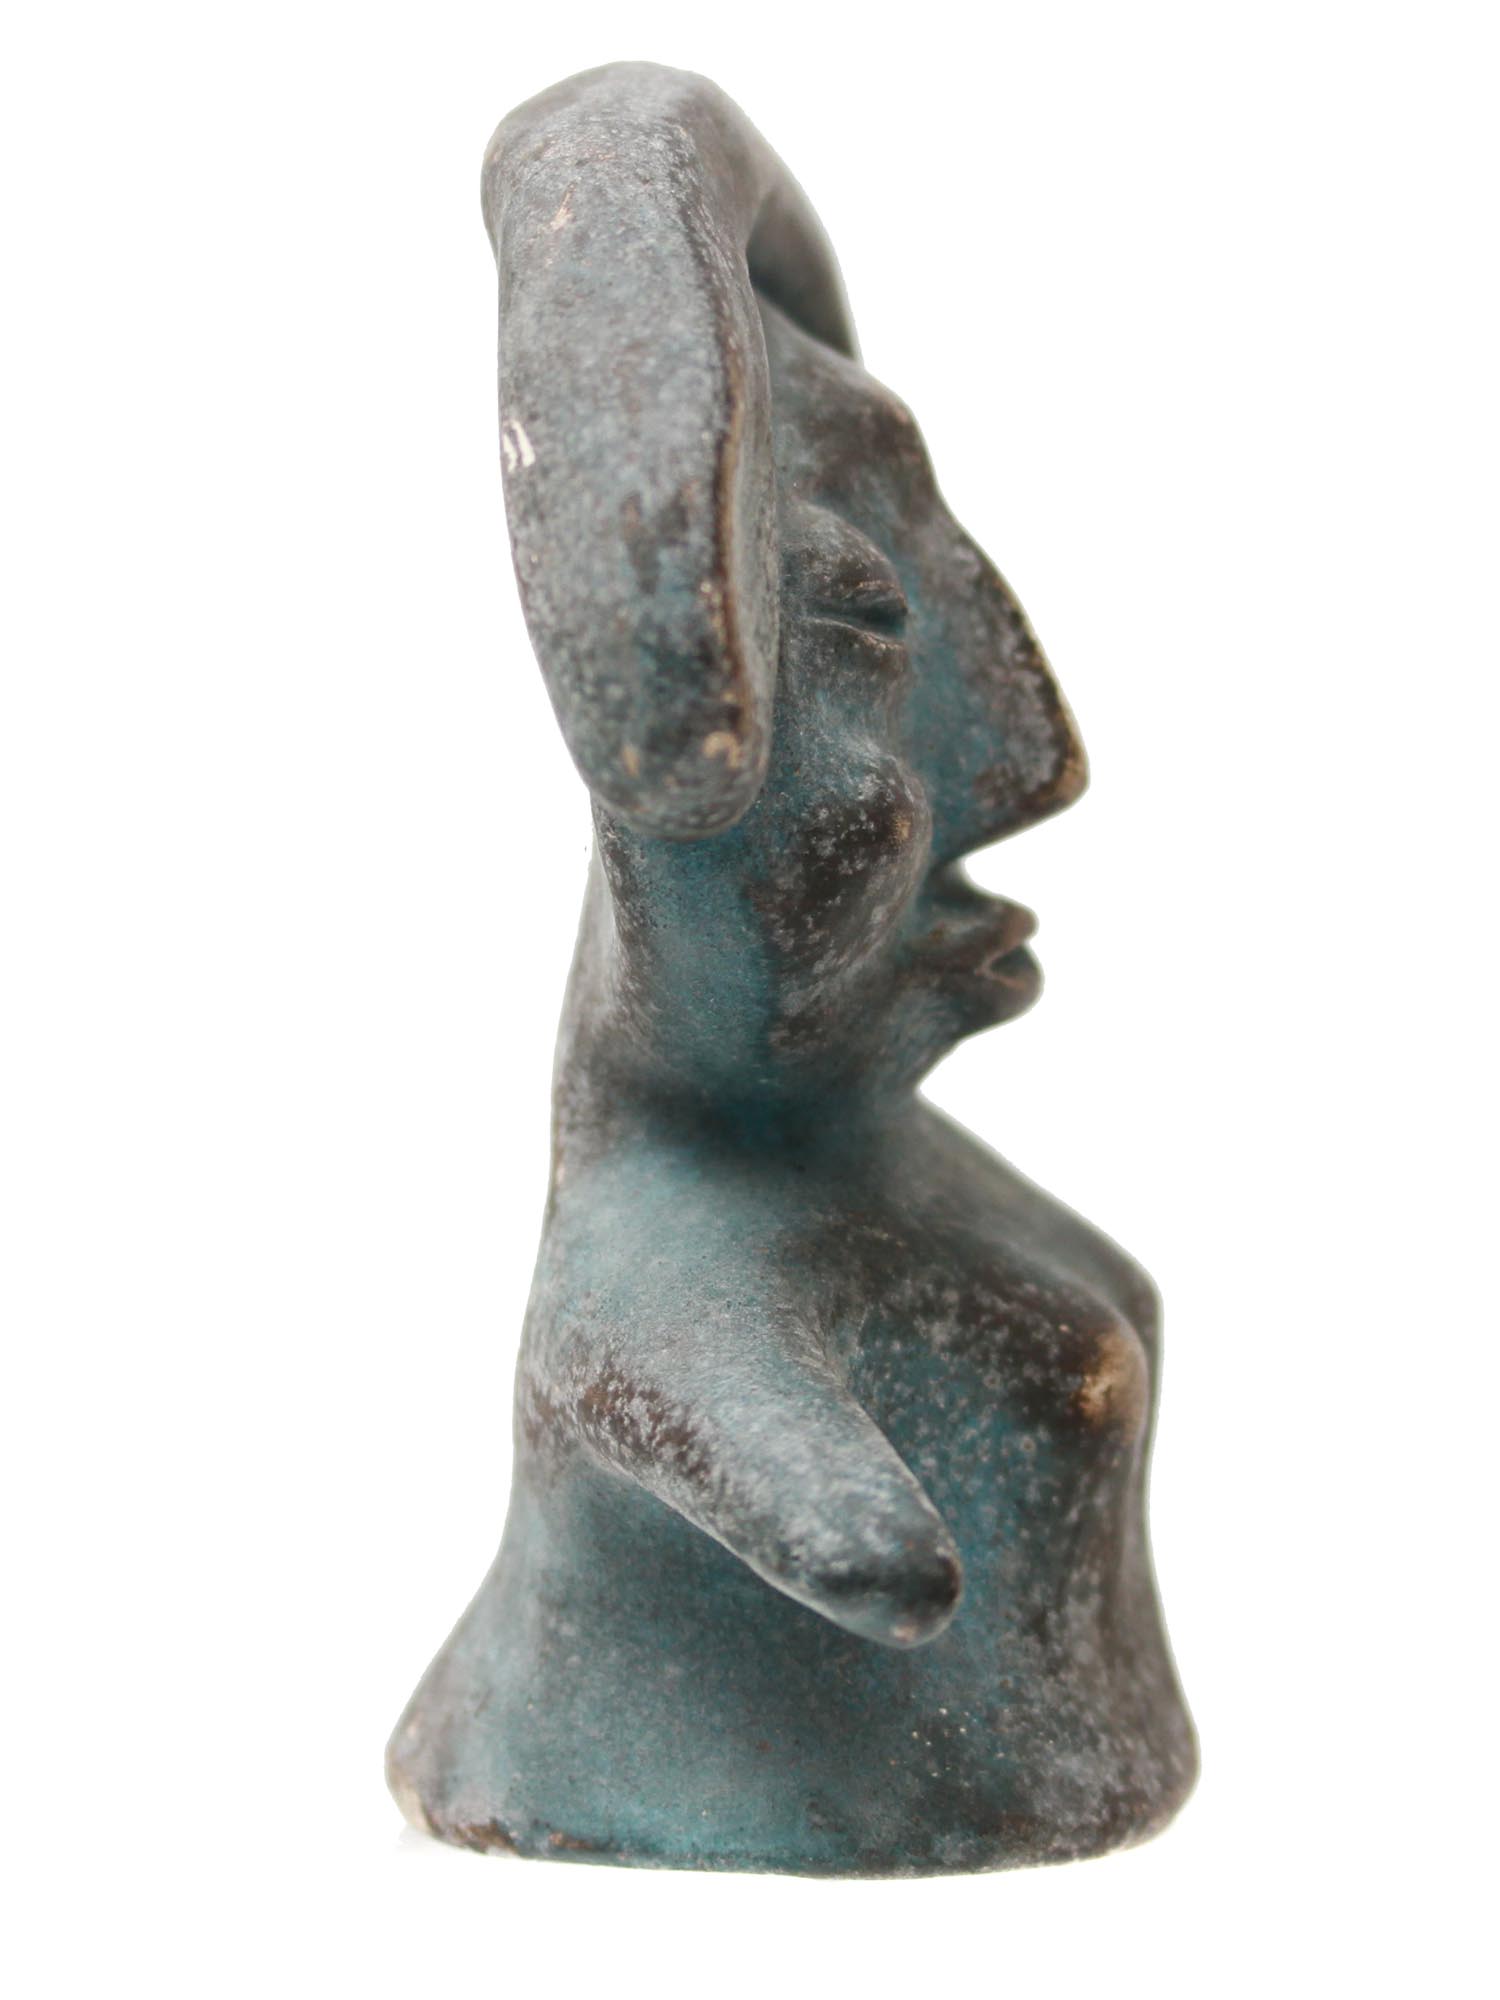 SOUTHERN AMERICAN CERAMIC STATUETTE OF NUDE WOMAN PIC-2